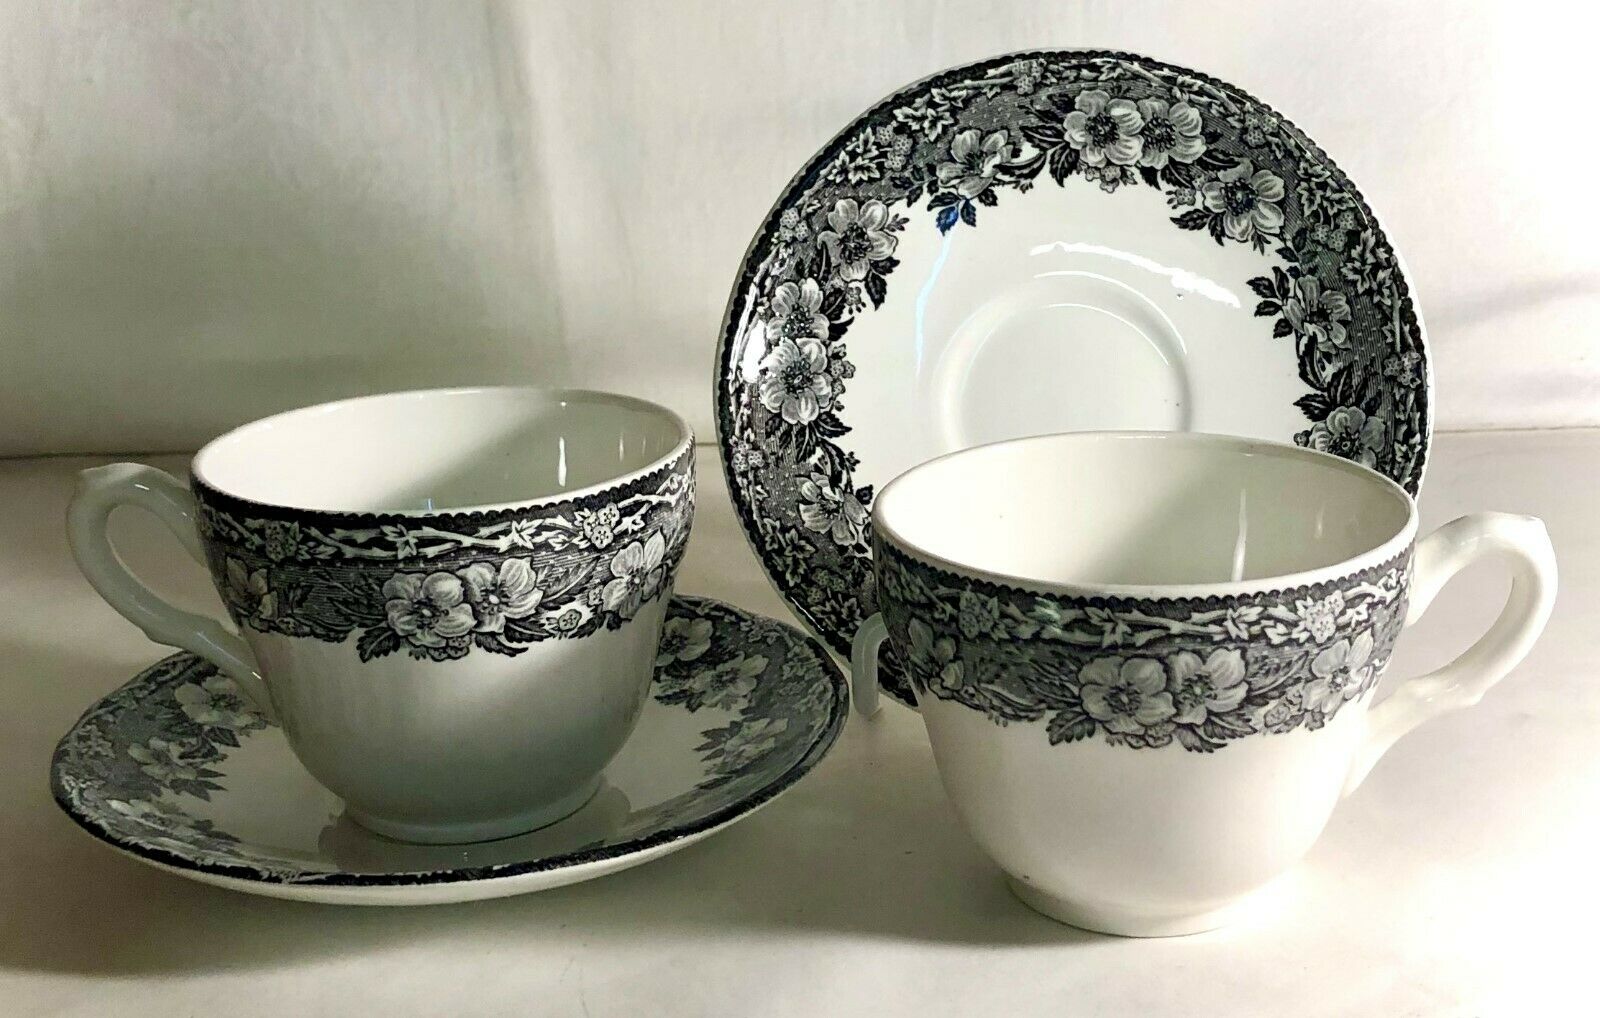 2 Wedgwood Malverne Cups & Saucers